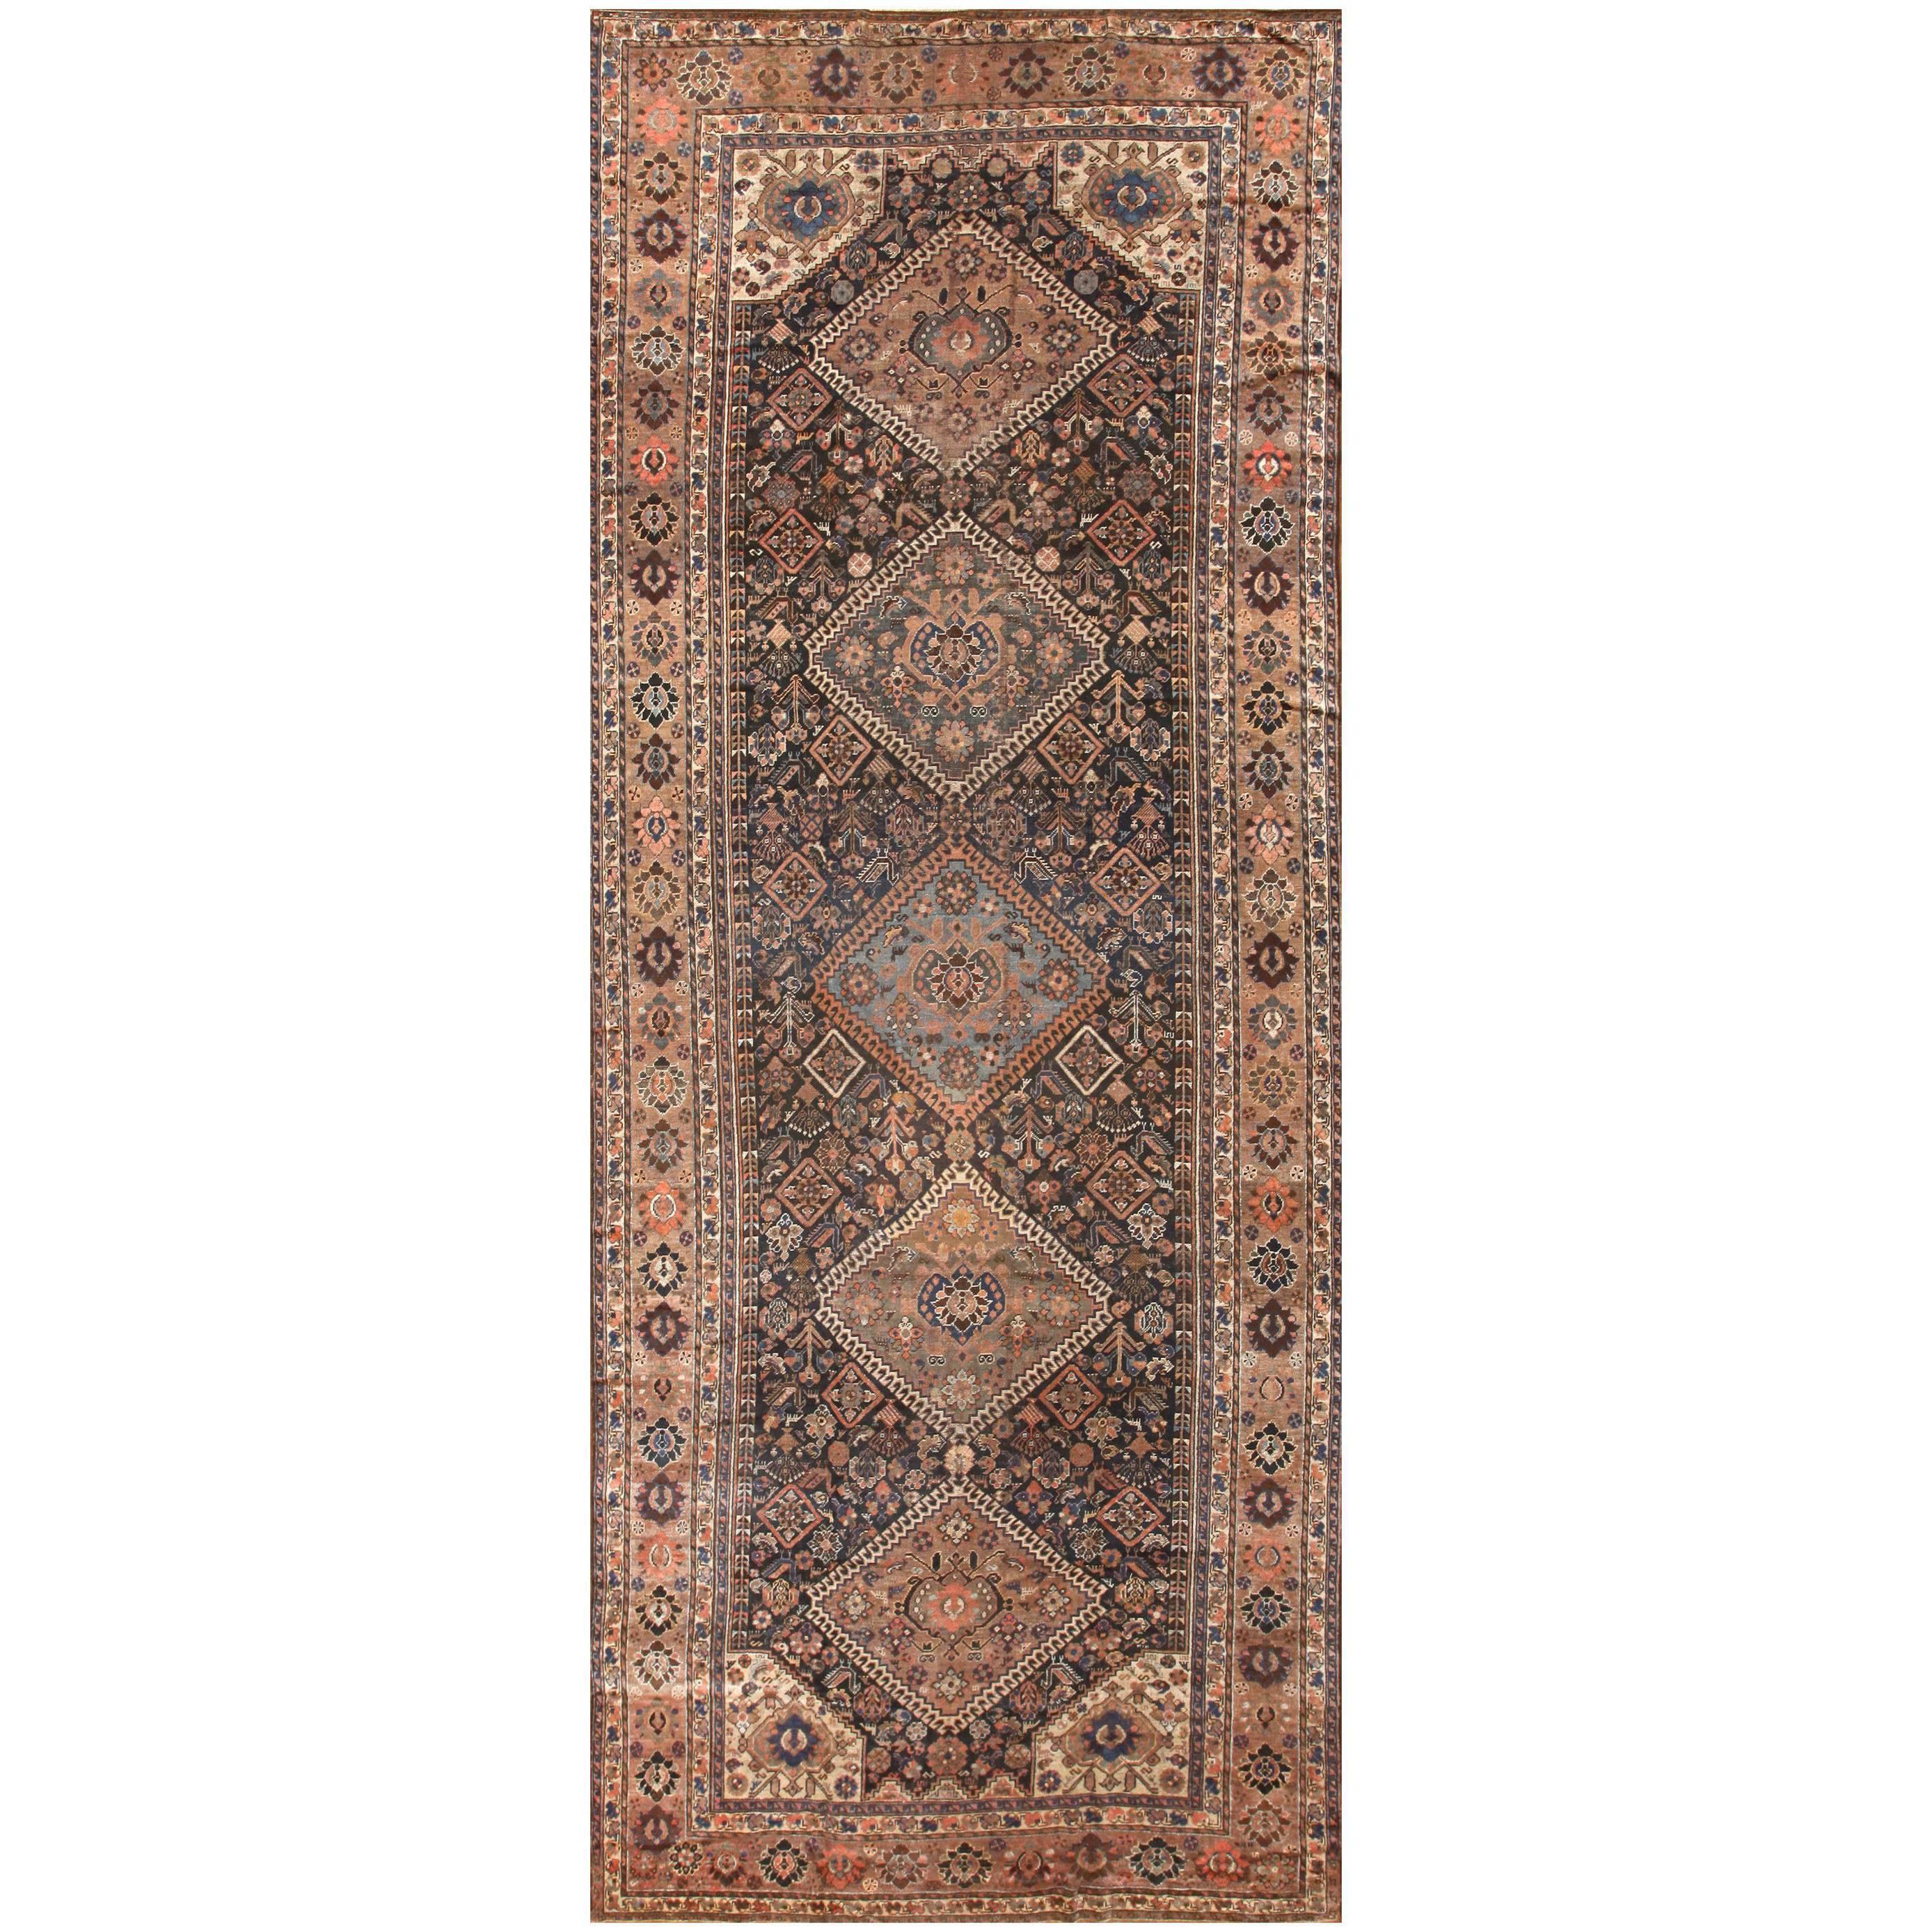 Antique Persian Qashqai Gallery Size Rug. Size: 7 ft x 16 ft 8 in 